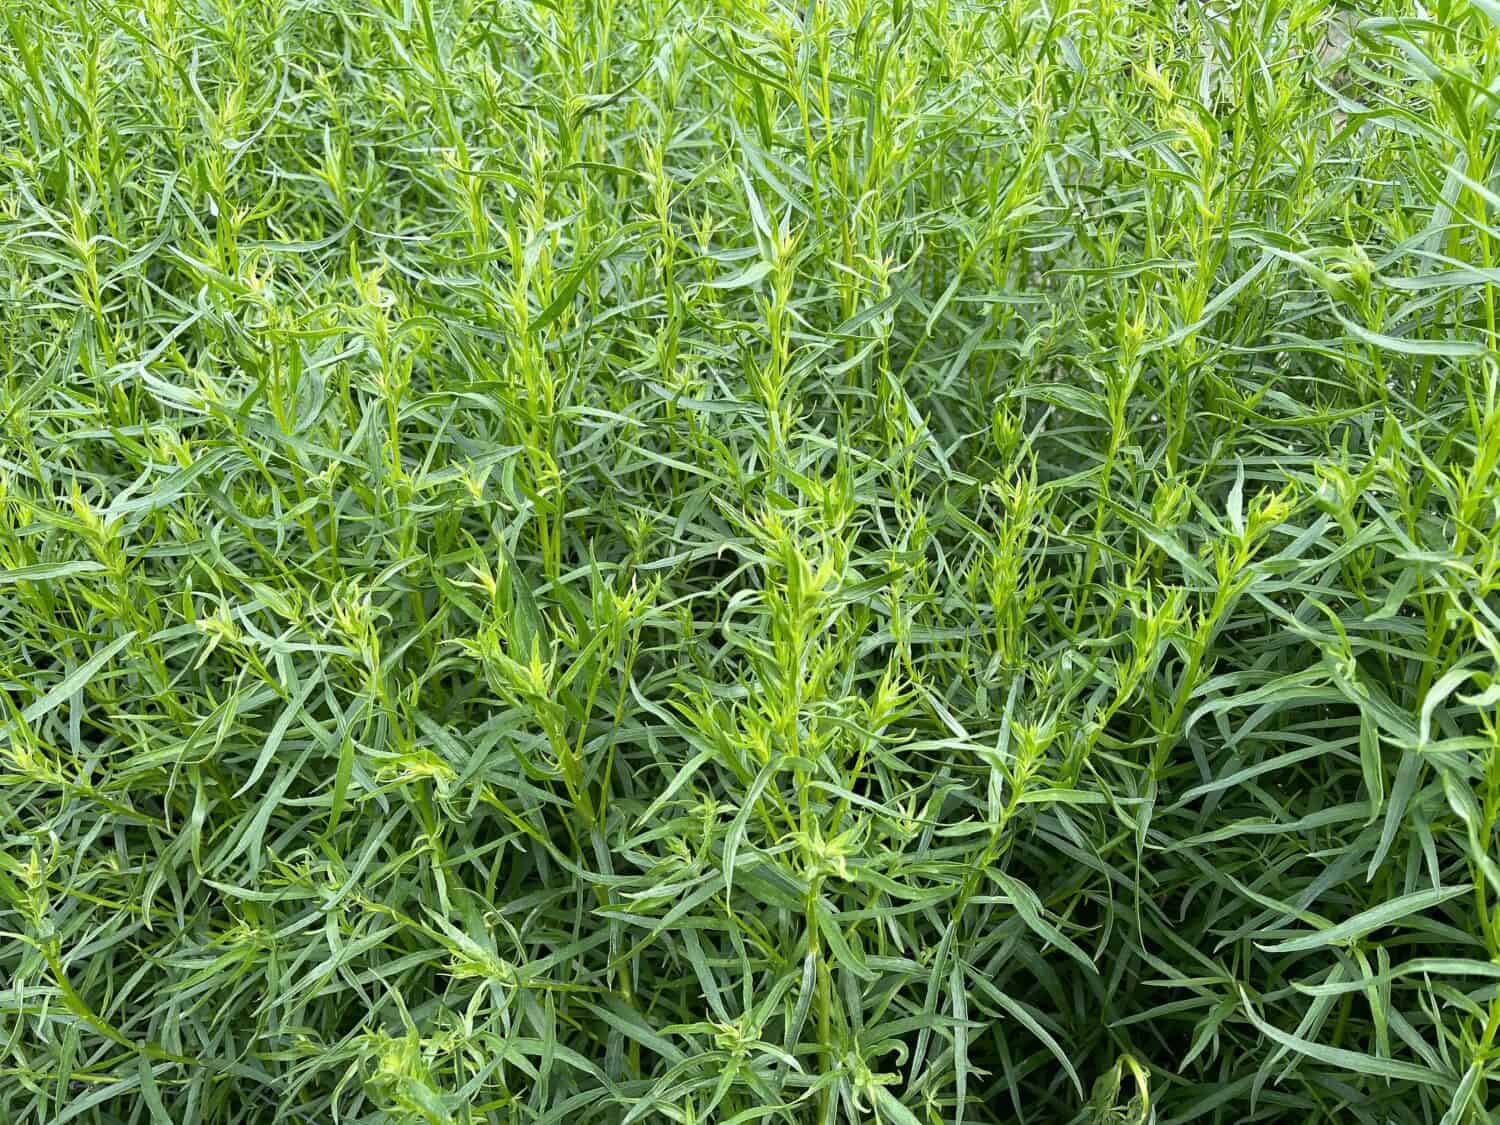 Tarragon, Artemisia Dracunculus, is an important medicinal and herb plant